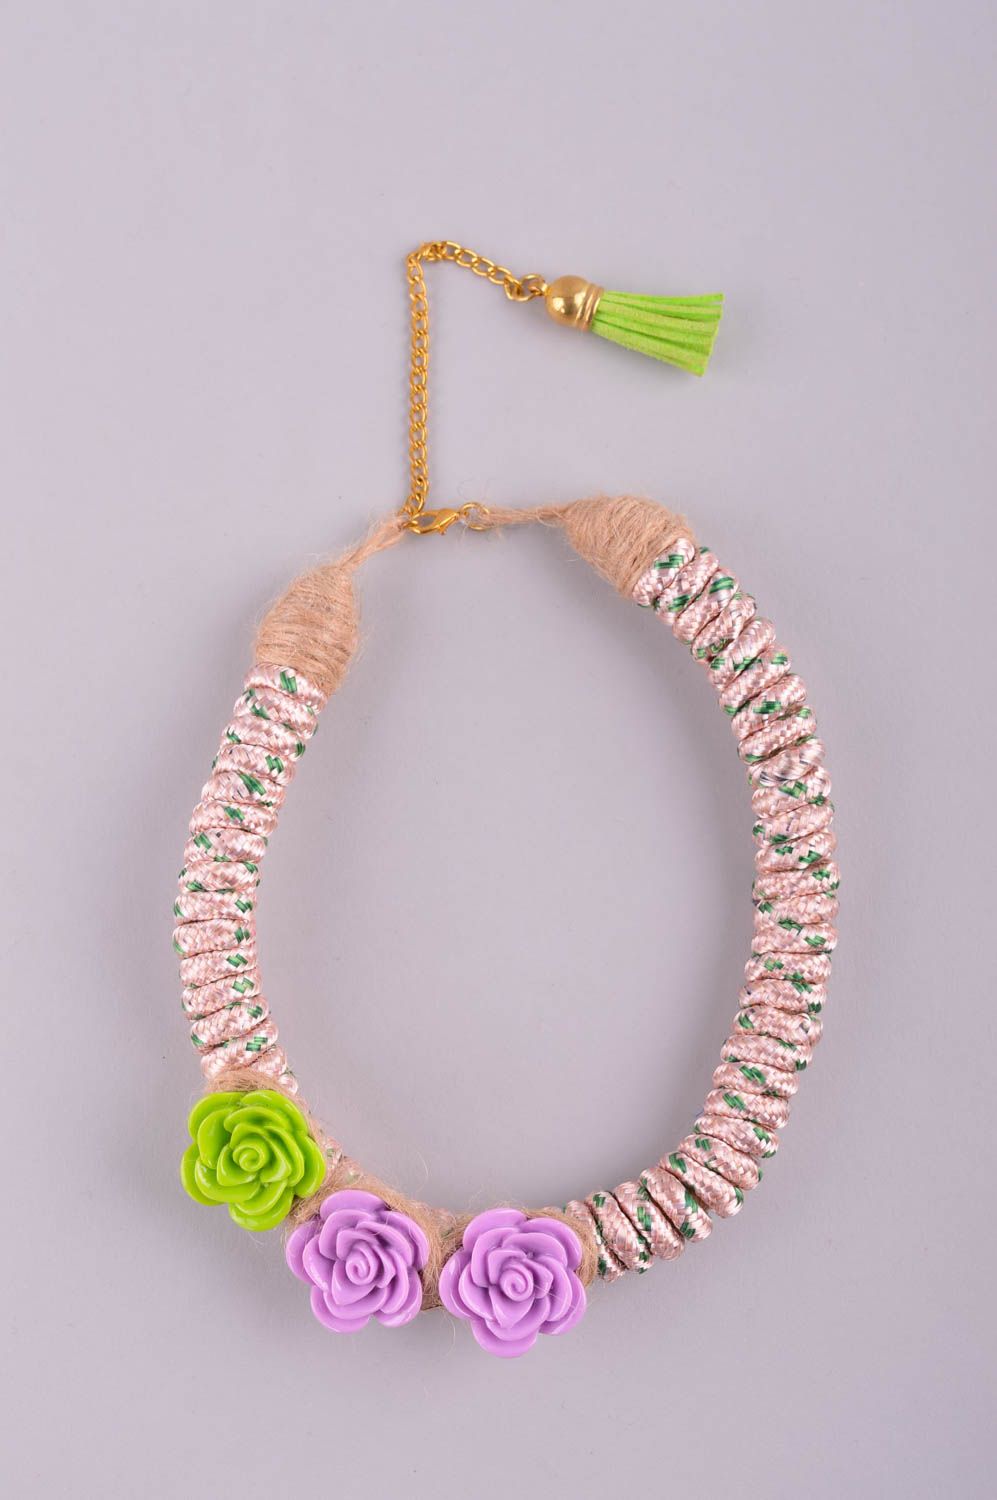 Beautiful handmade textile necklace fashion accessories cool neck accessories photo 2